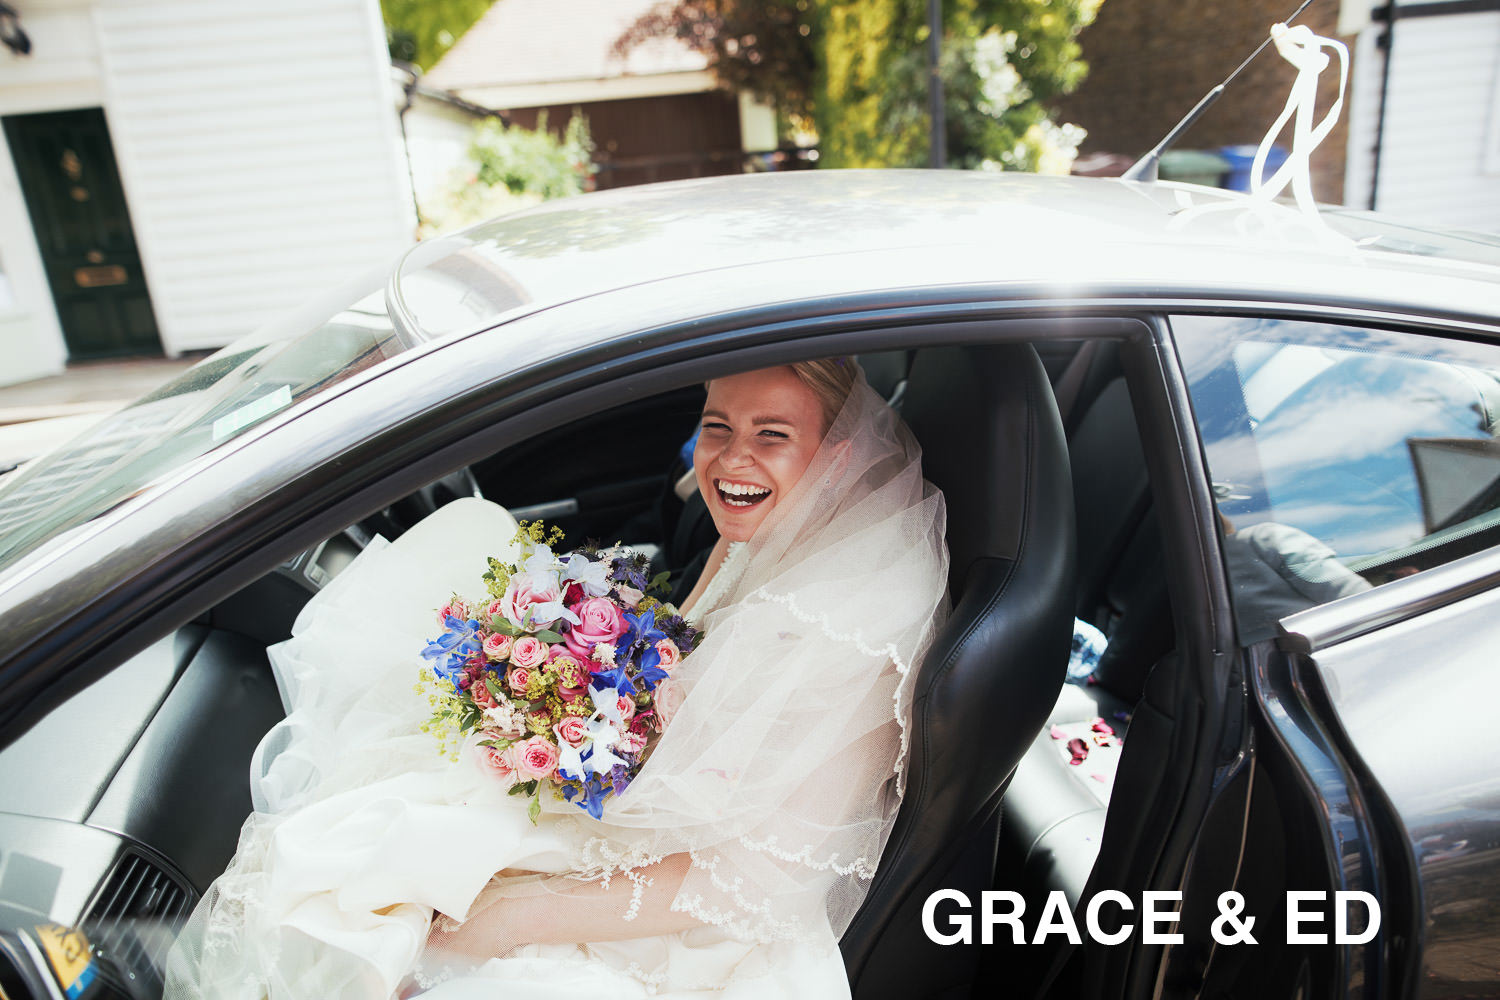 Bride getting in the car smiling after her wedding at St Giles & All Saints Church, Orsett. Holding a bouquet and wearing a veil.